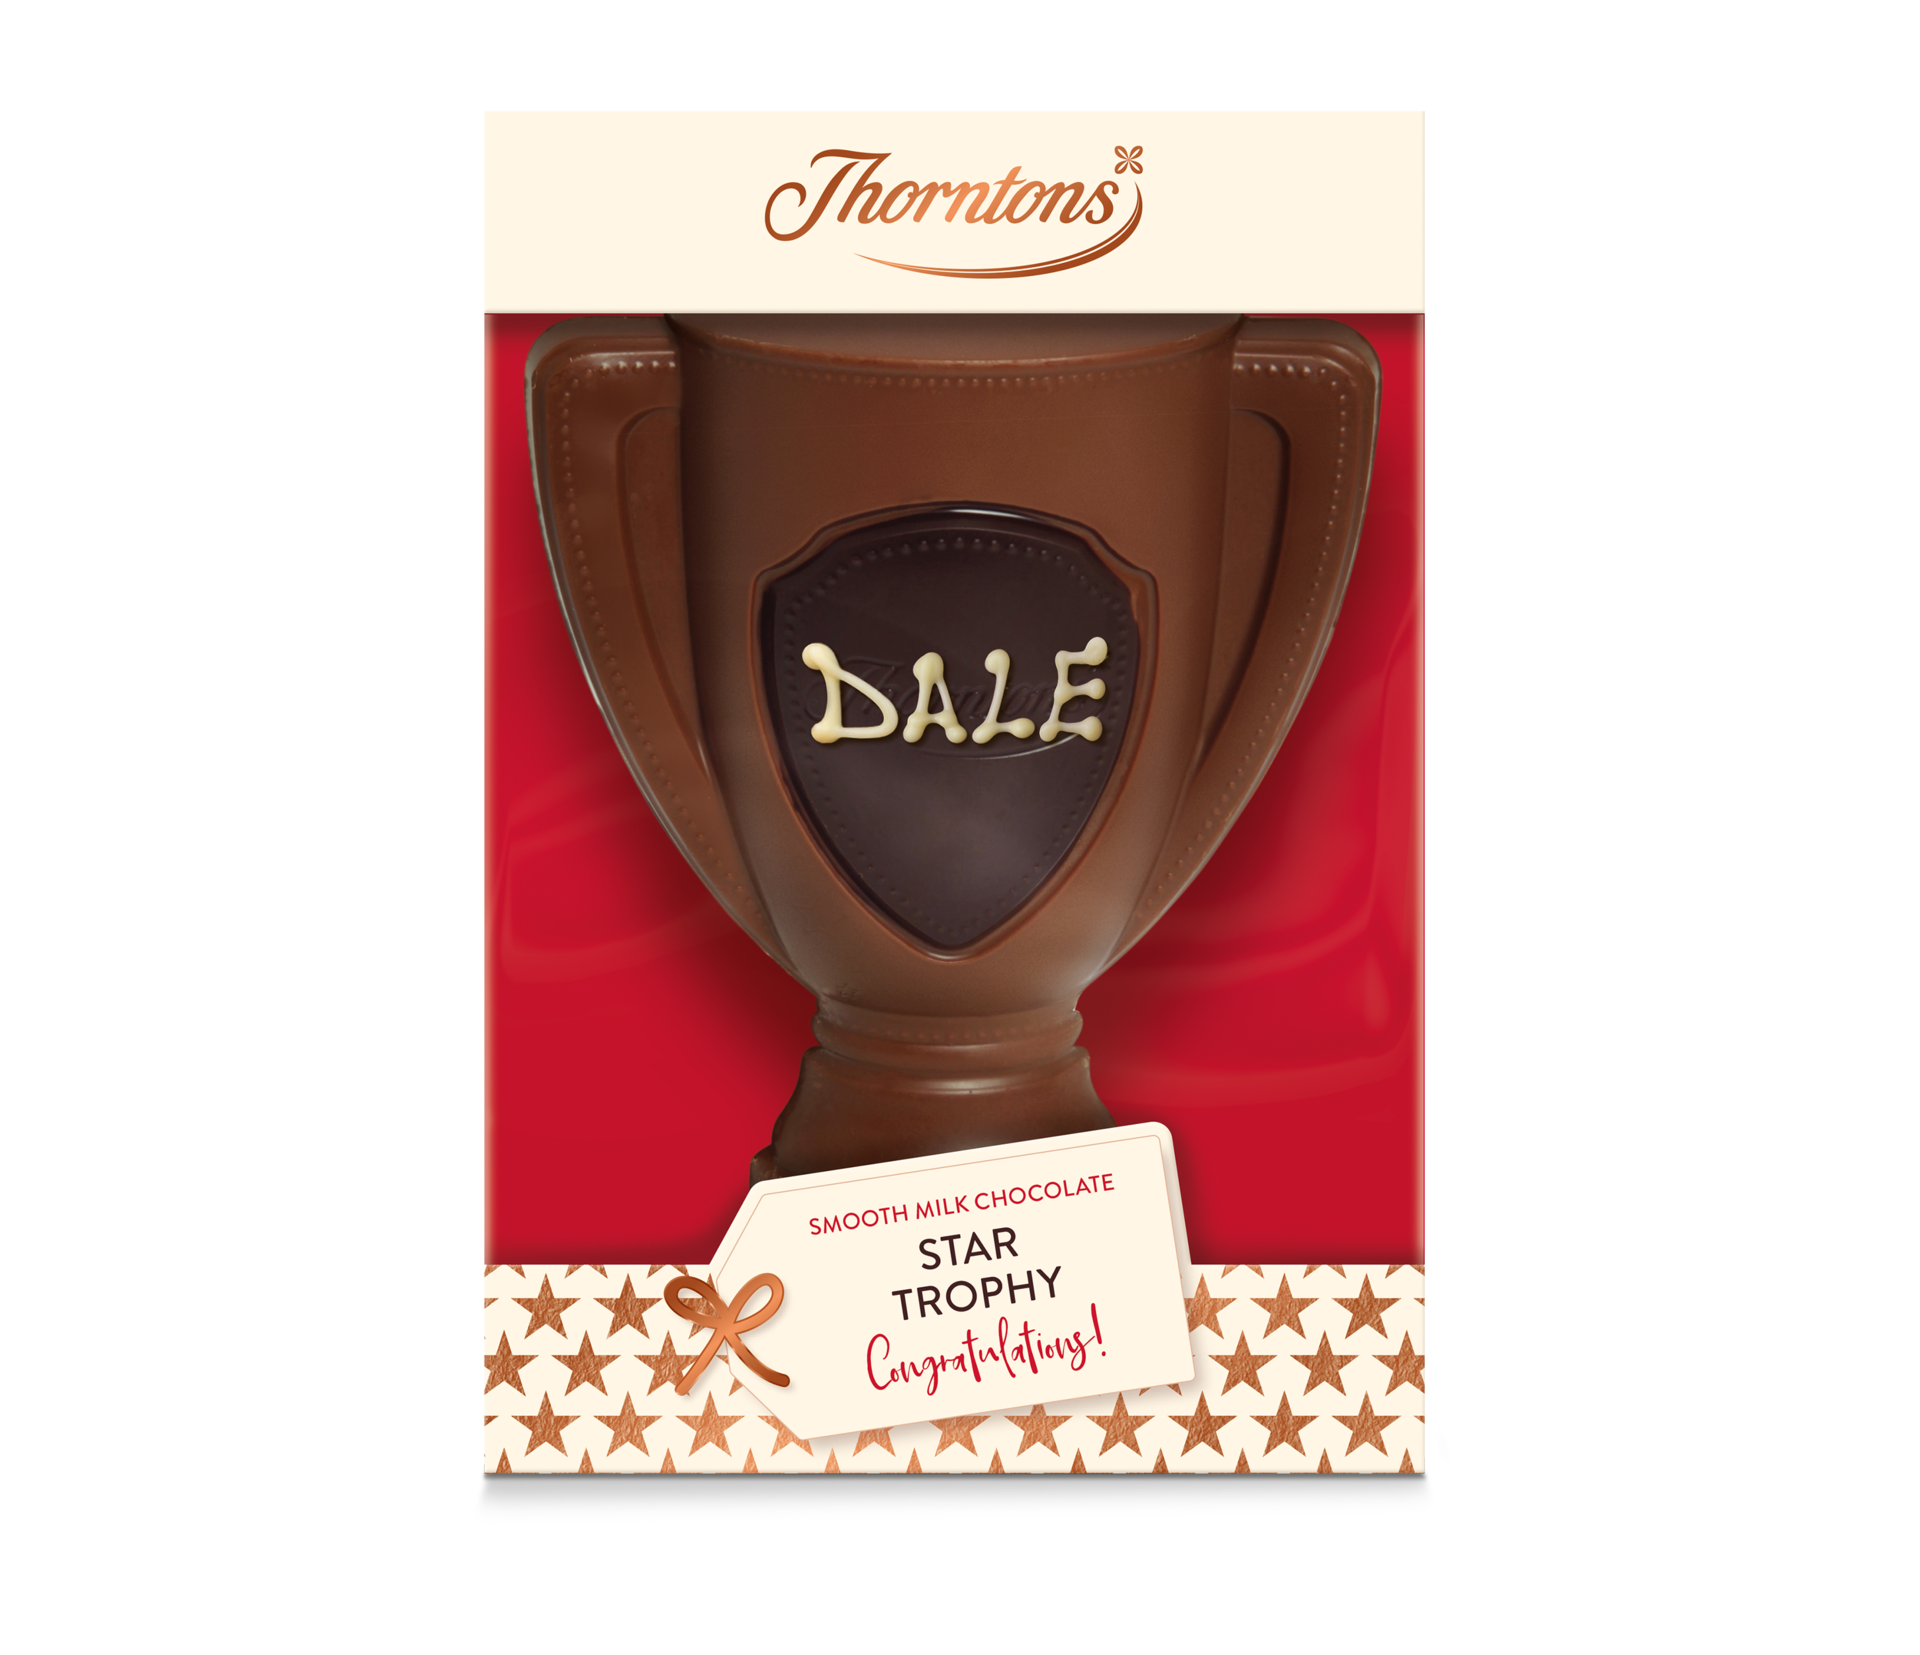 https://www.thorntons.com/medias/sys_master/images/hd3/h7b/8916764000286/77180549_main/77180549-main.png?resize=ProductGridComponent